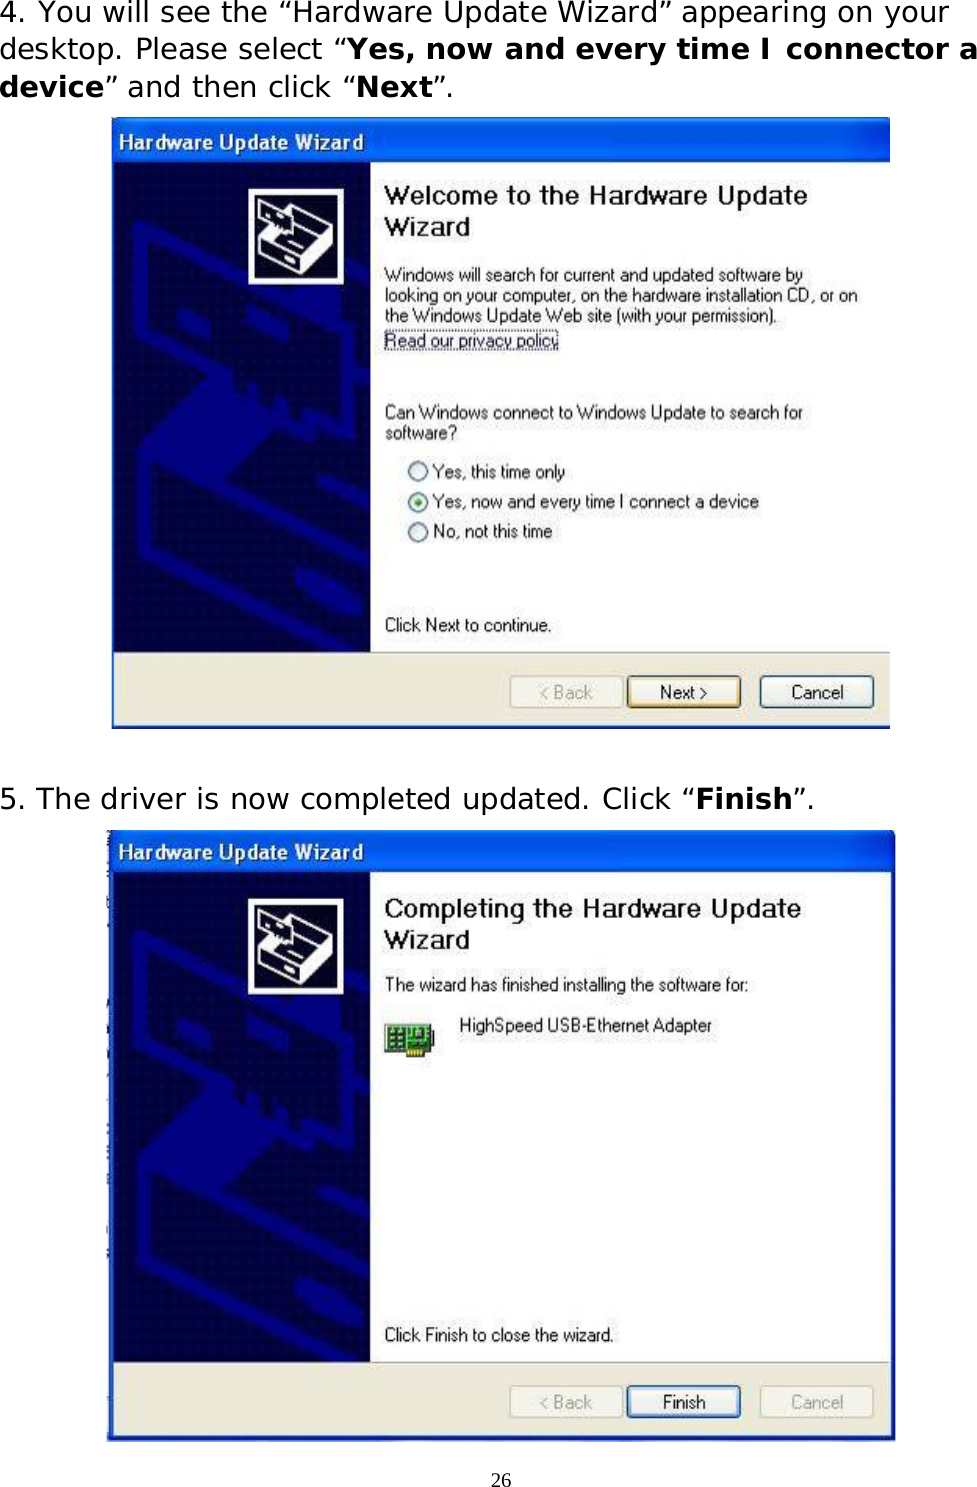  26 4. You will see the “Hardware Update Wizard” appearing on your desktop. Please select “Yes, now and every time I connector a device” and then click “Next”.   5. The driver is now completed updated. Click “Finish”.  